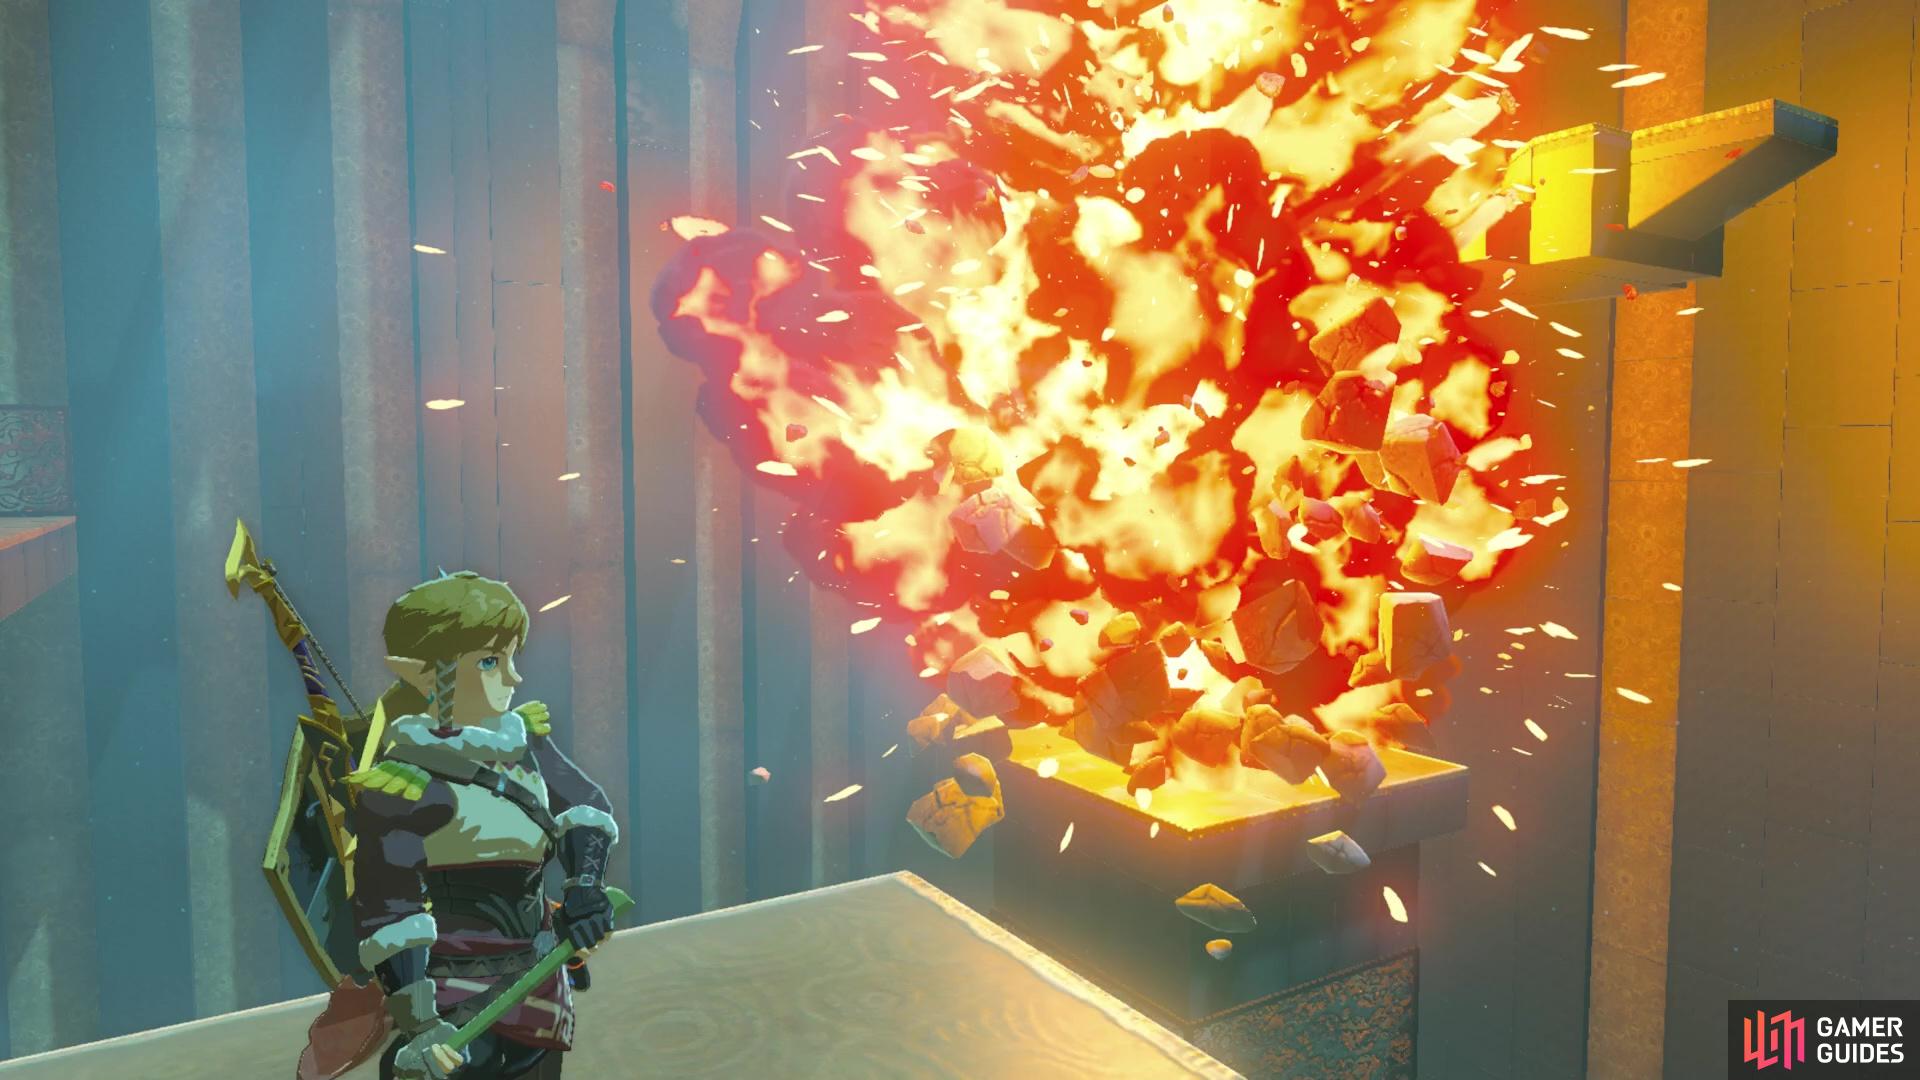 Link knows that cool guys don't look at explosions.